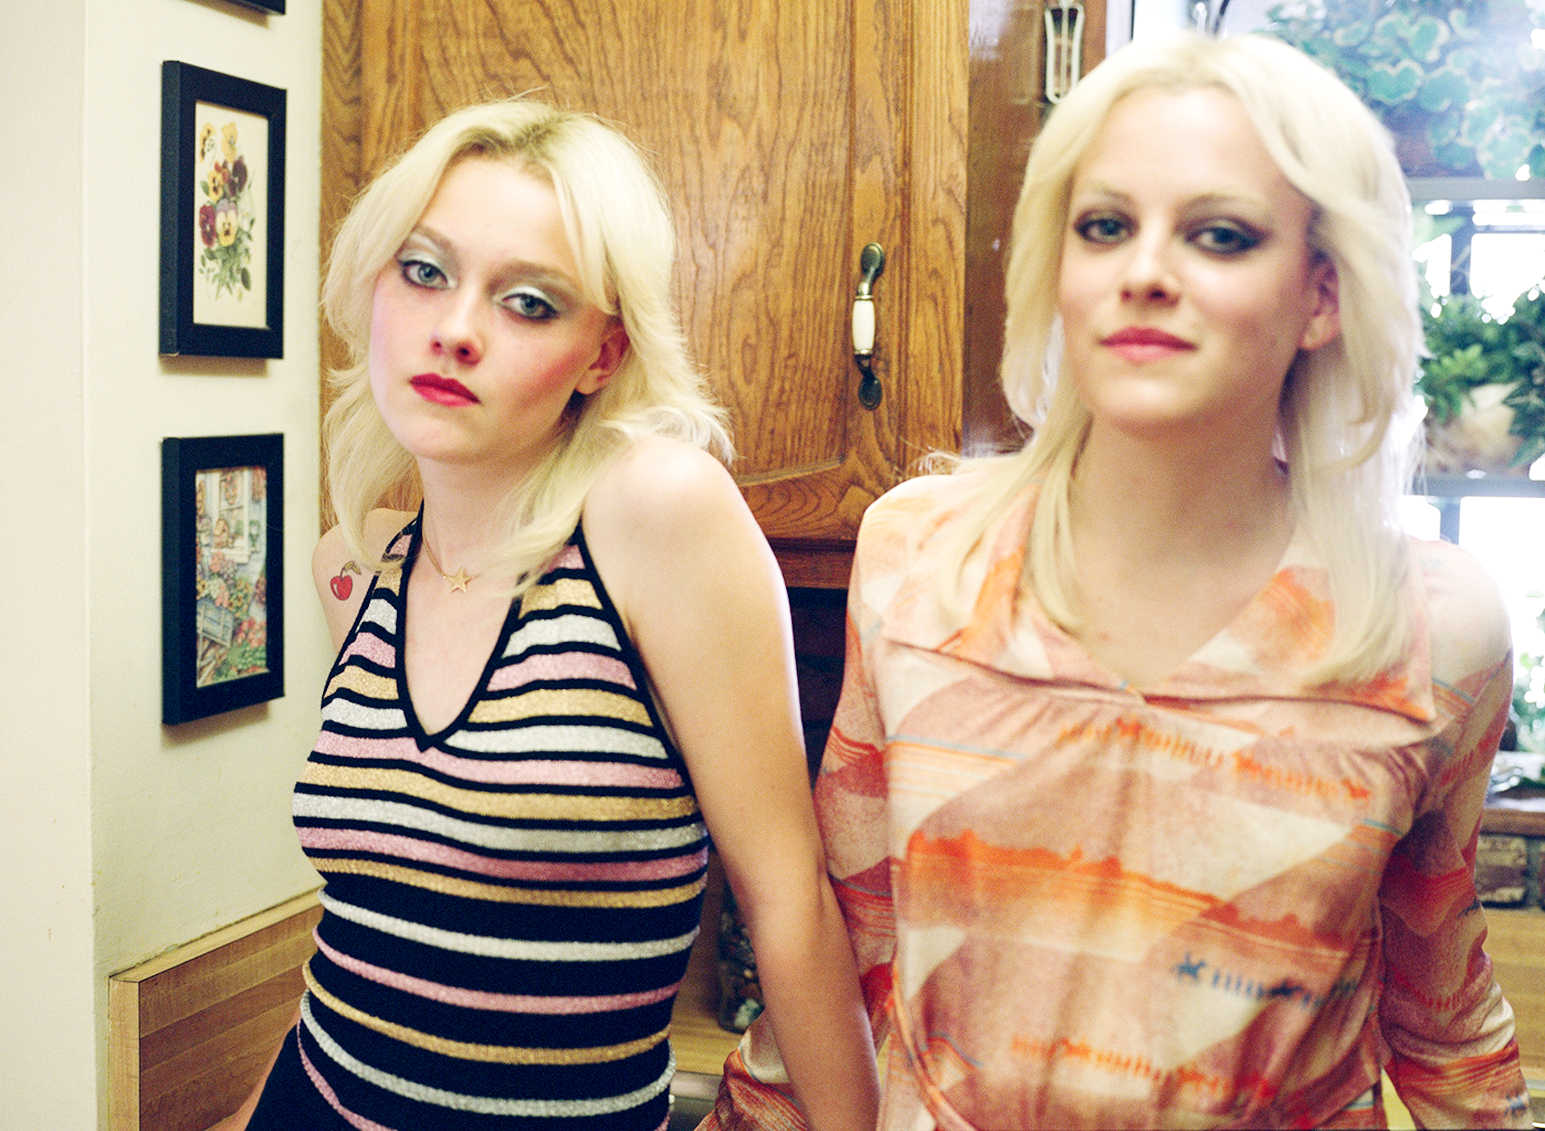 Dakota Fanning stars as Cherie Currie and Riley Keough stars as Marie Currie in Apparition's The Runaways (2010)